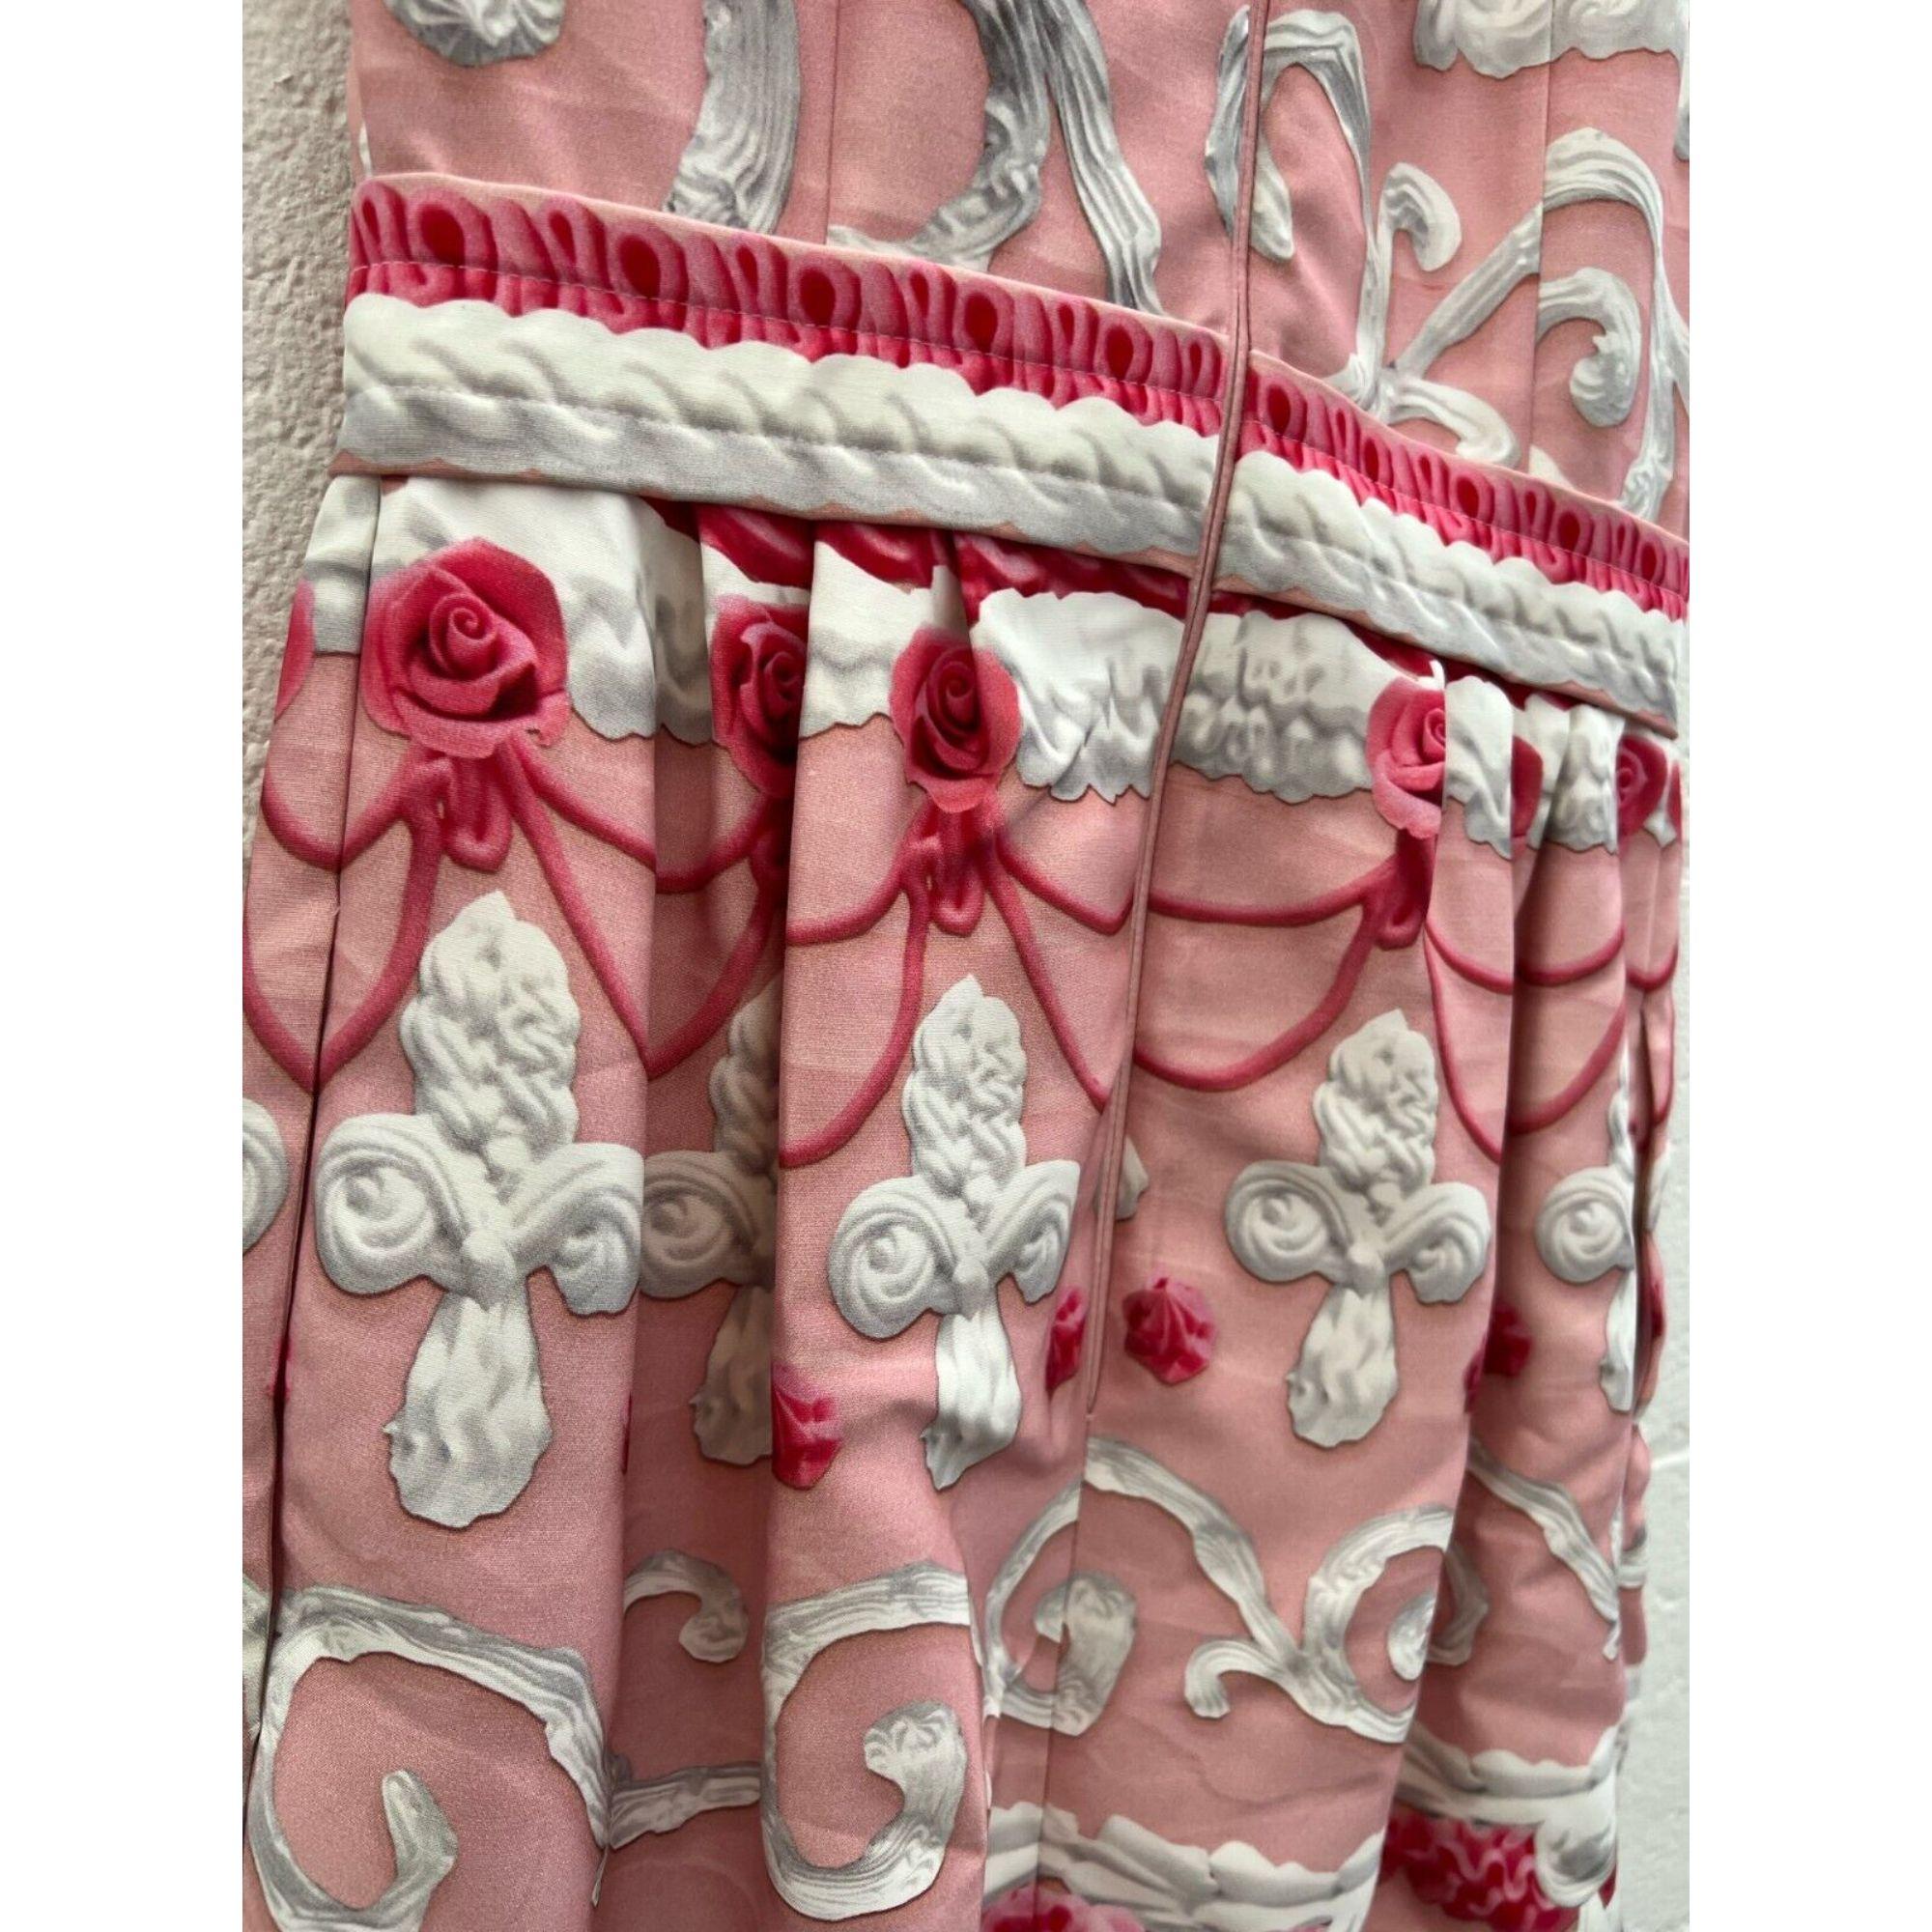 AW20 Moschino Couture Marie Antoinette Pink Pastel Cake Dress by Jeremy Scott For Sale 3